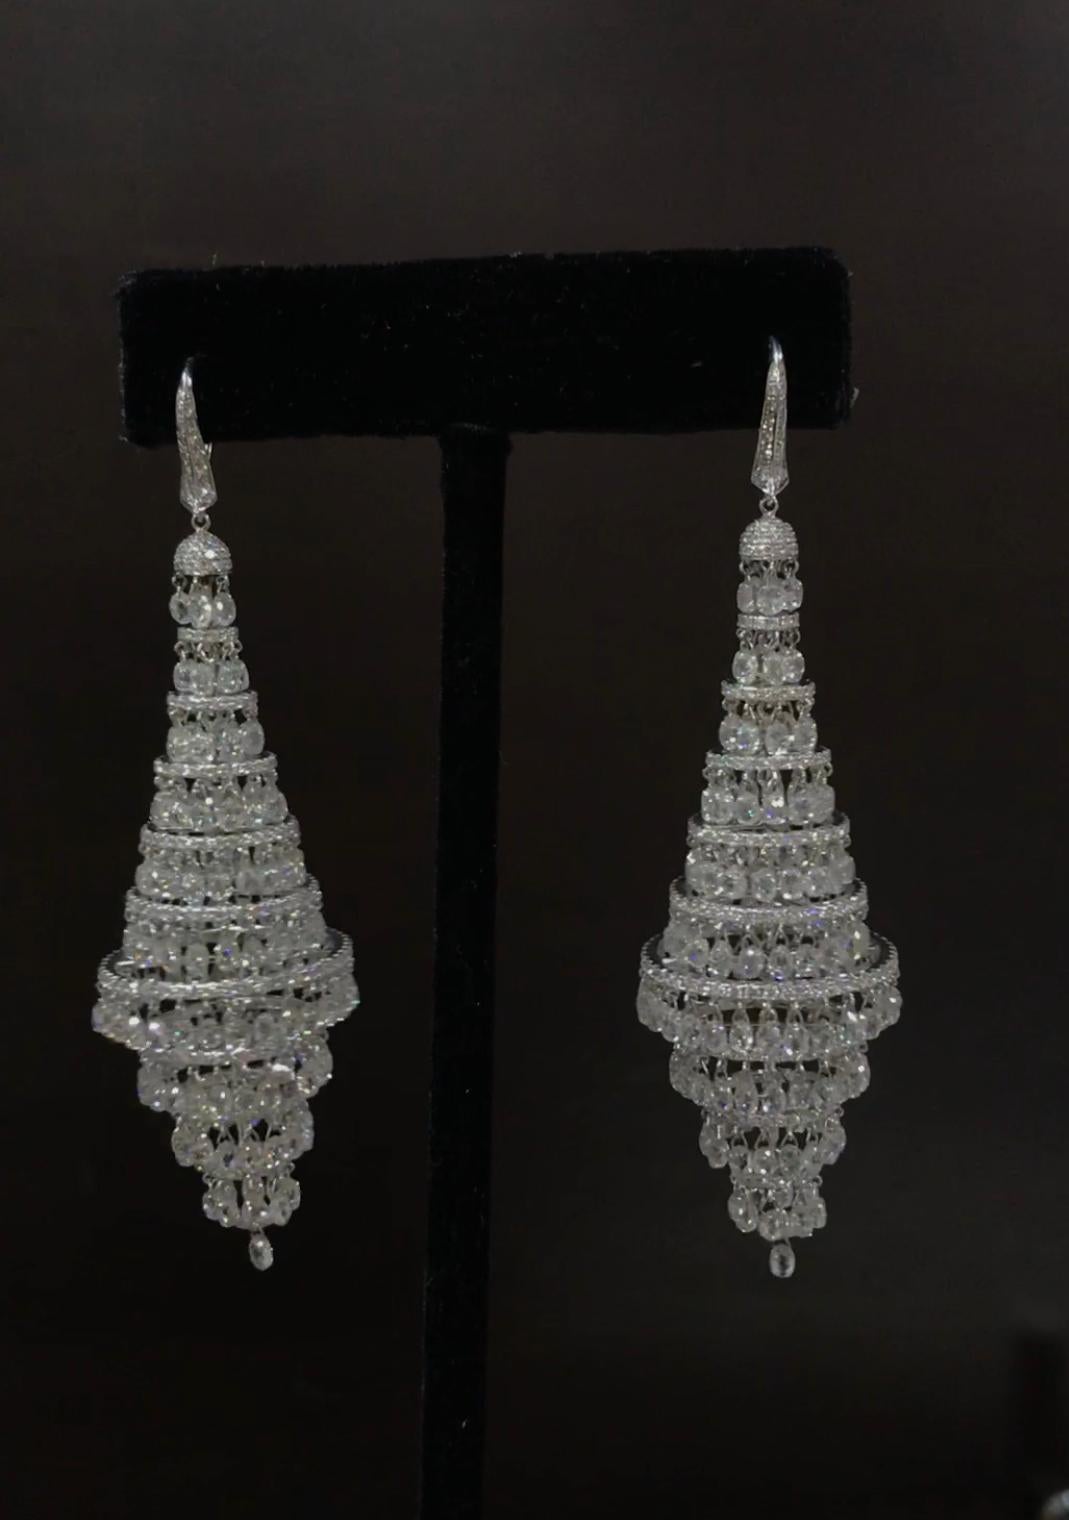 JR 45.53 Carat Diamond Briolette Chandelier 18 Karat White Gold Earring

Our Briolettes chandelier earring is charming & sensational. It frames the face just right without overpowering and amplifies your beauty.

Diamond Weight : 45.53